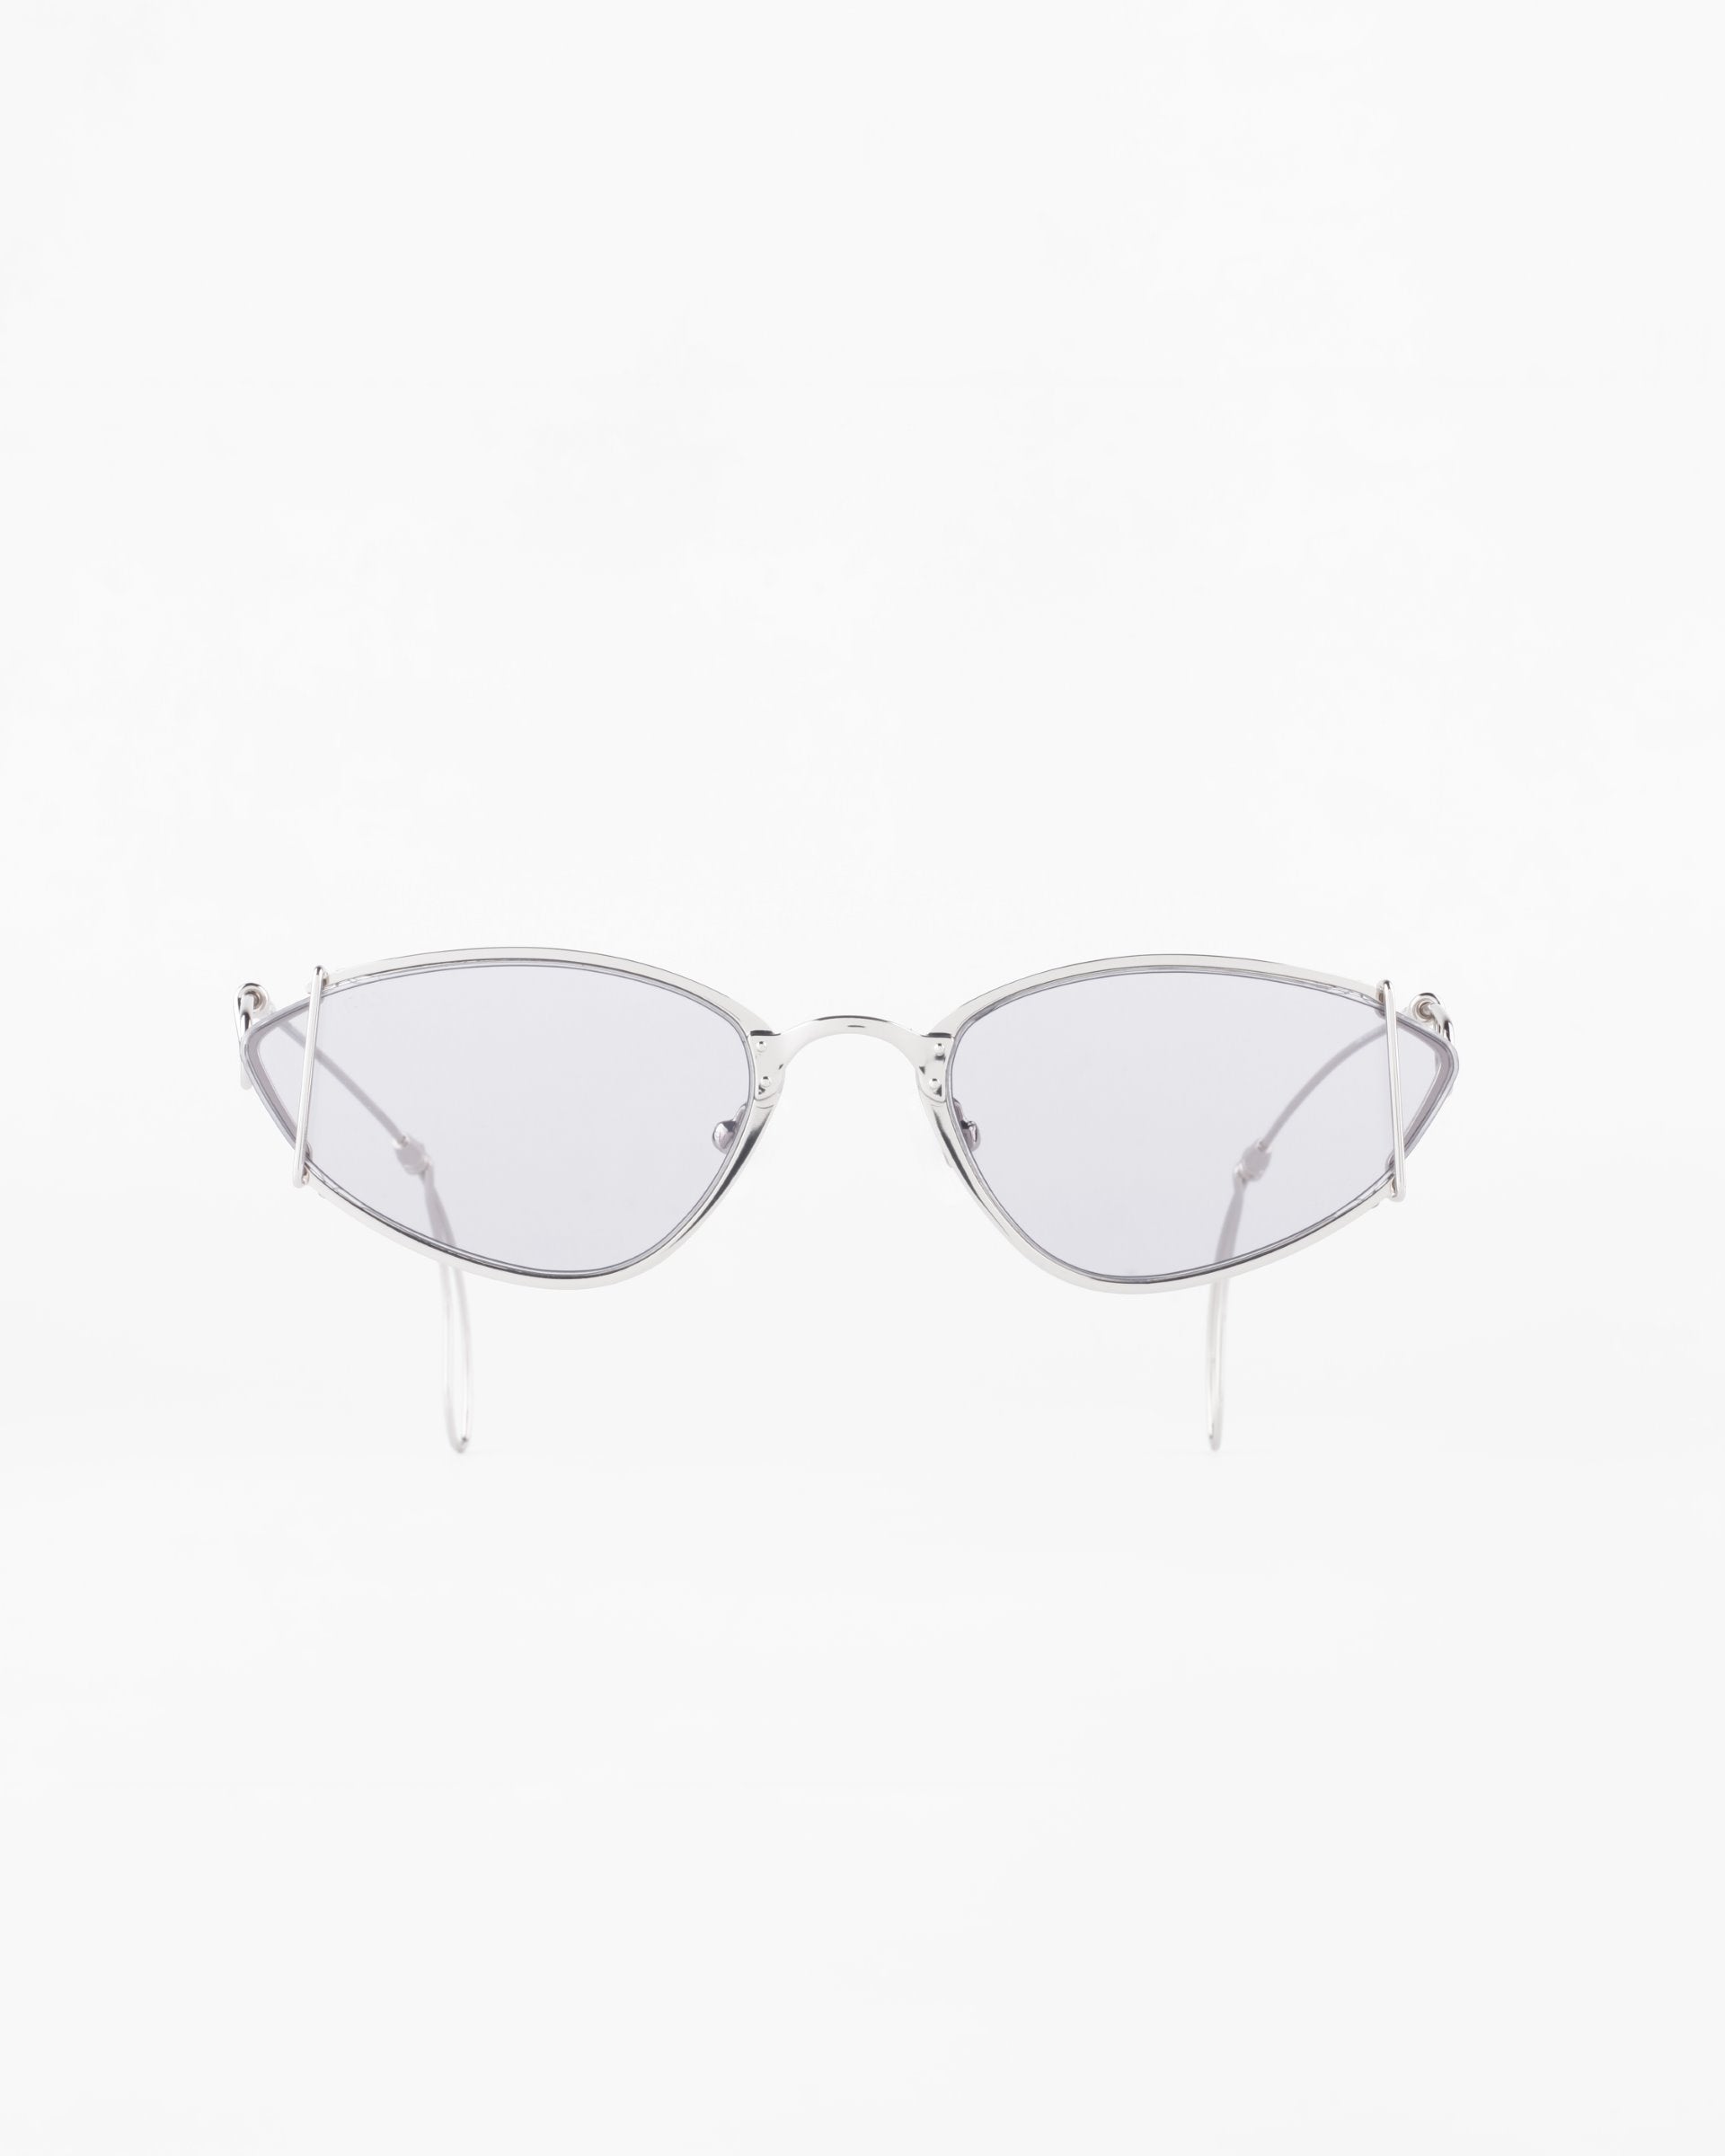 A pair of stylish sunglasses with thin, gold-plated stainless steel frames and slightly tinted, elongated oval lenses against a white background. The glasses have a modern and minimalist design with delicate temples that offer 100% UVA &amp; UVB protection. These are the Ornate by For Art&#39;s Sake®.